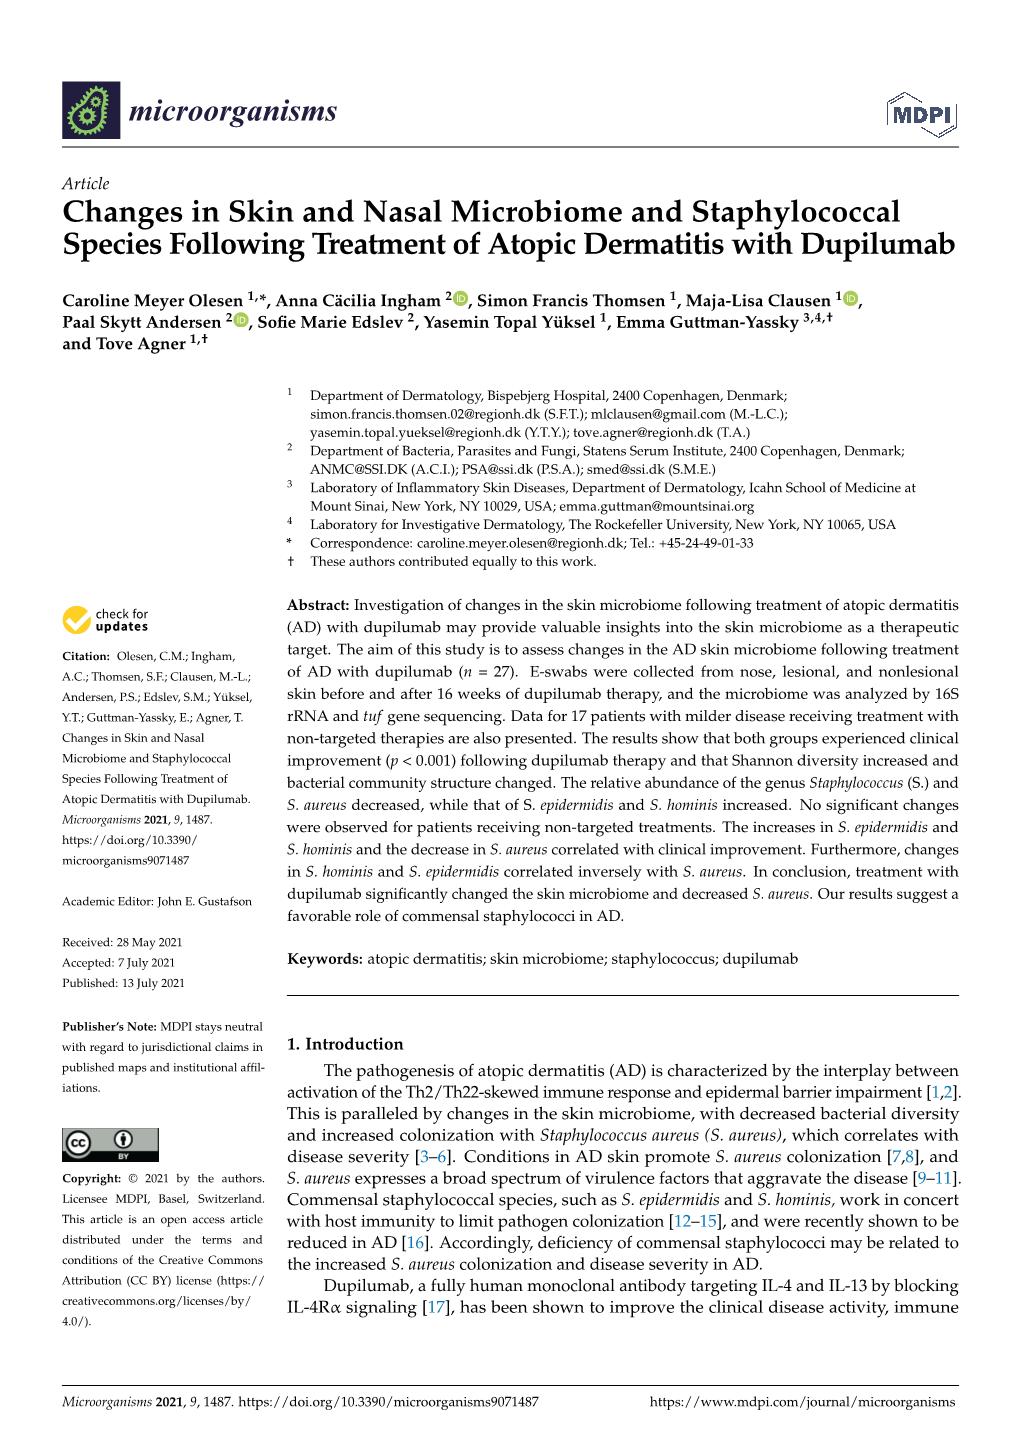 Changes in Skin and Nasal Microbiome and Staphylococcal Species Following Treatment of Atopic Dermatitis with Dupilumab